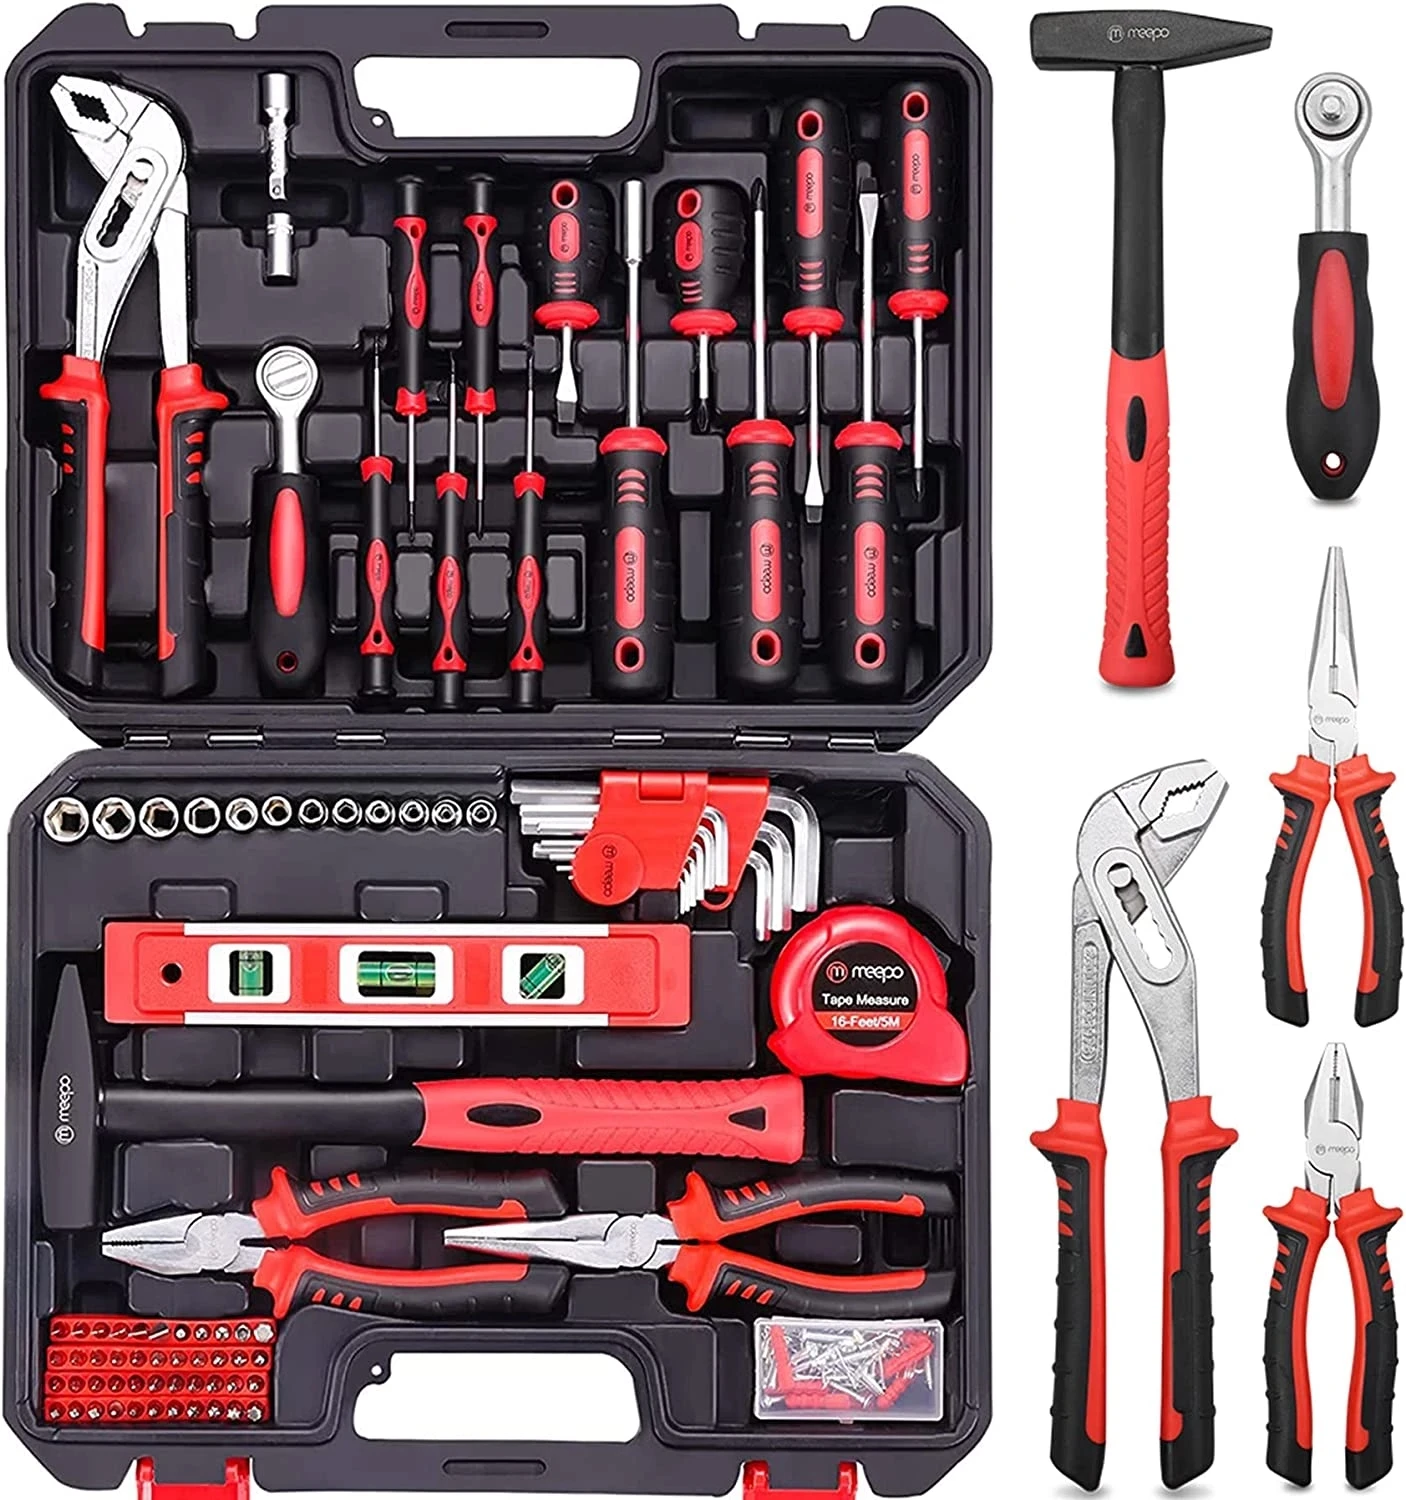 New low price Basics Household Tool Kit with Tool Storage Case 142 Piece